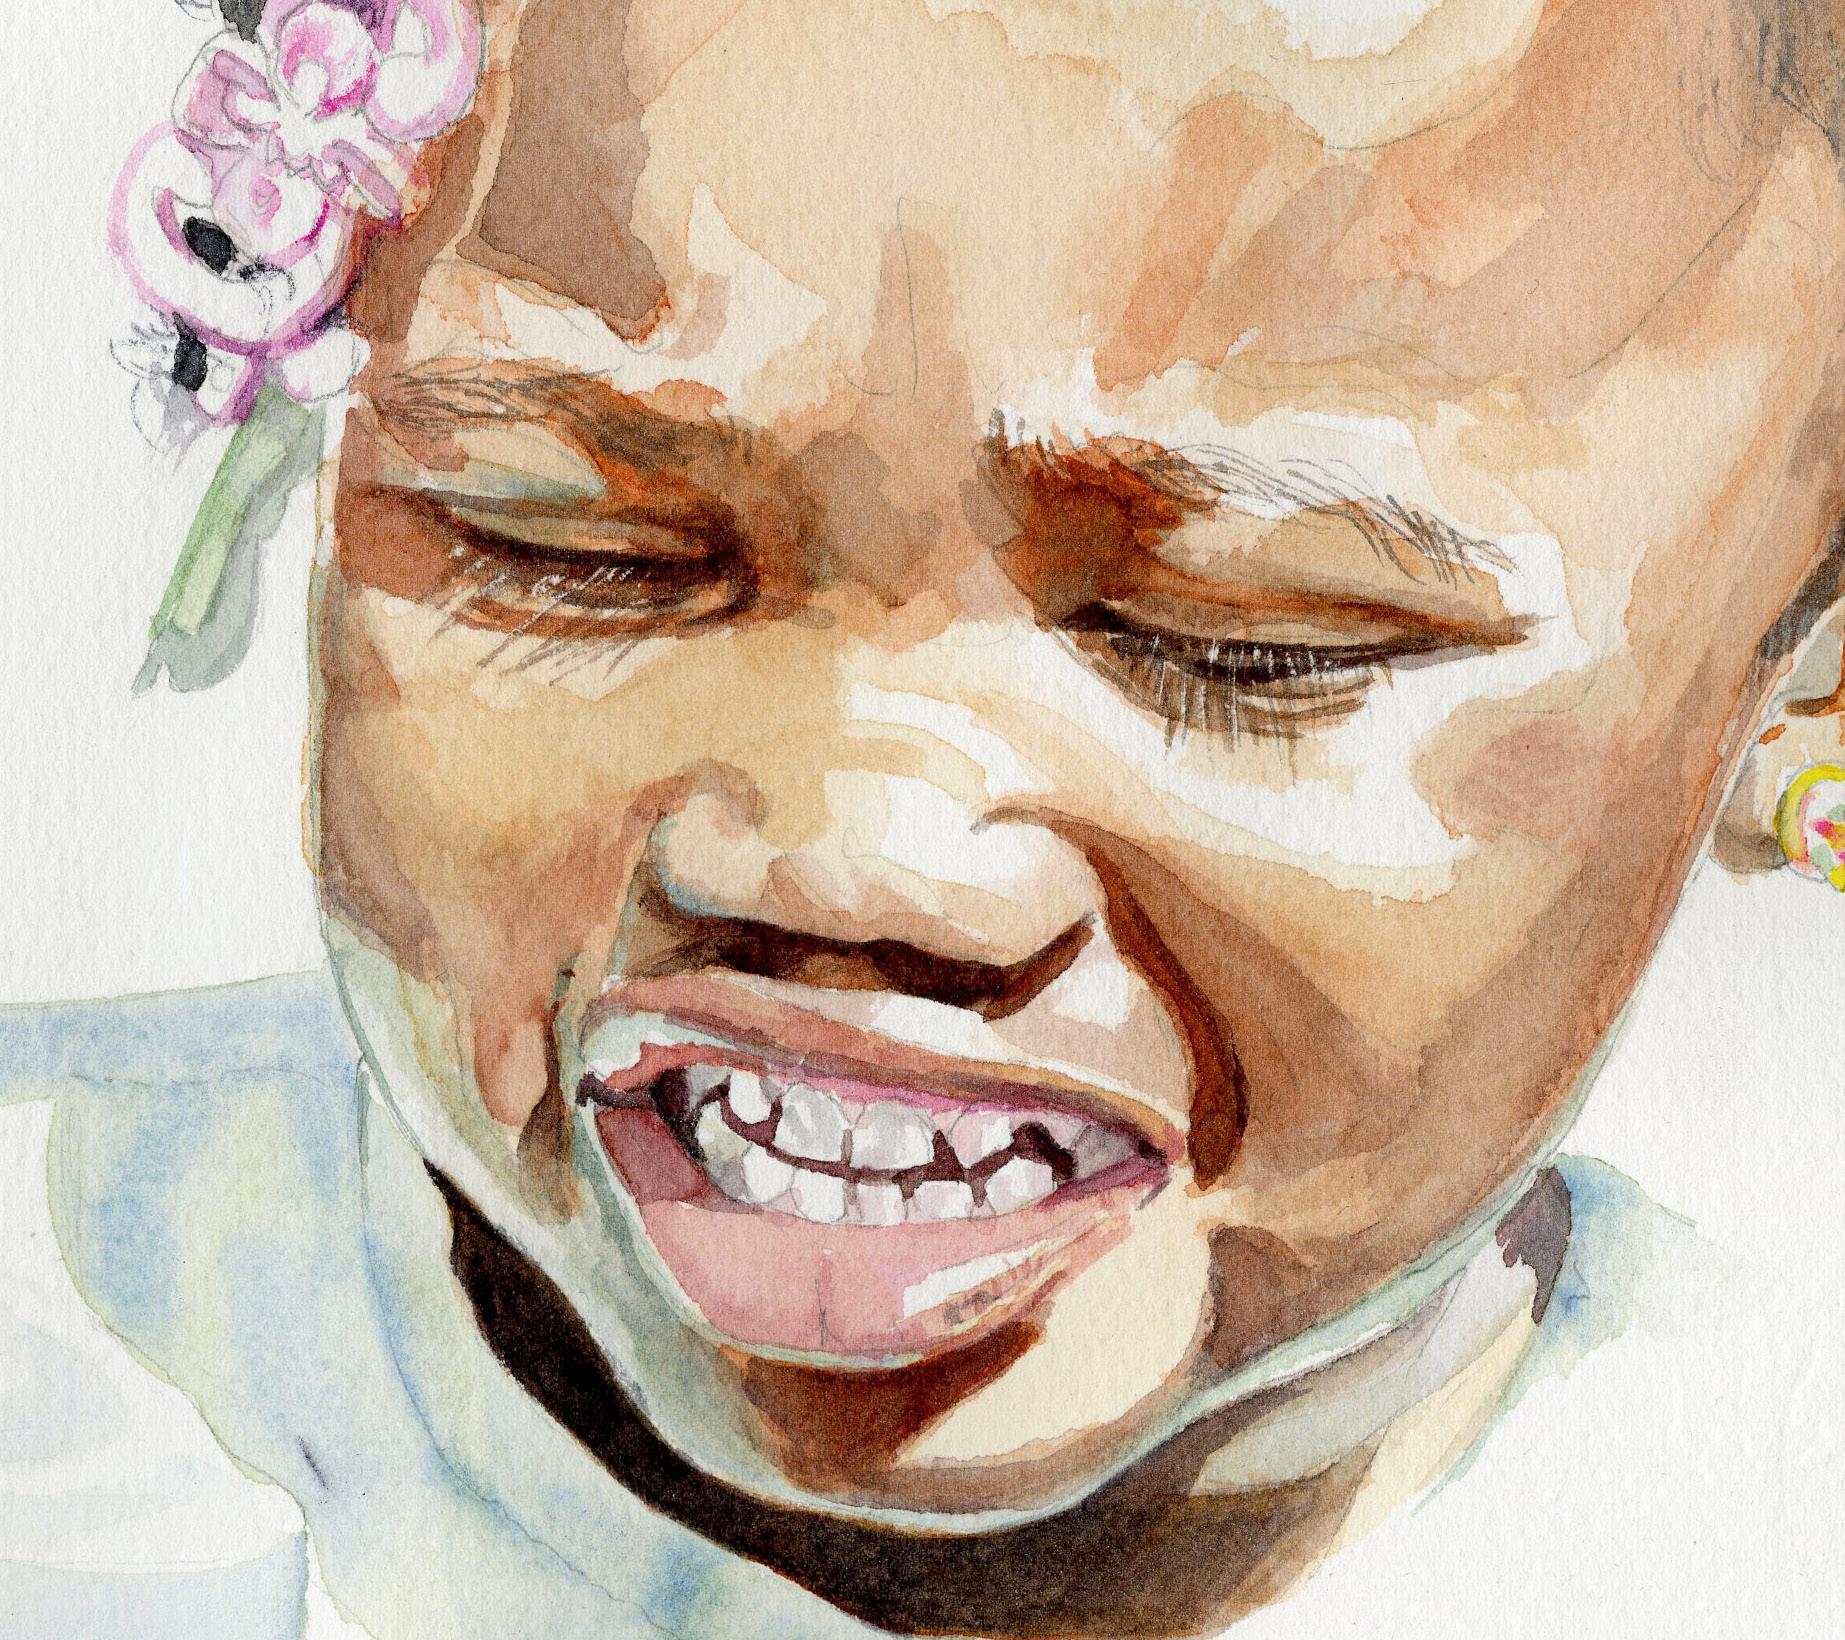 Stolen Moments, Attitude Shift #2    (Emily with Sippy Cup) - Art by Darius Steward